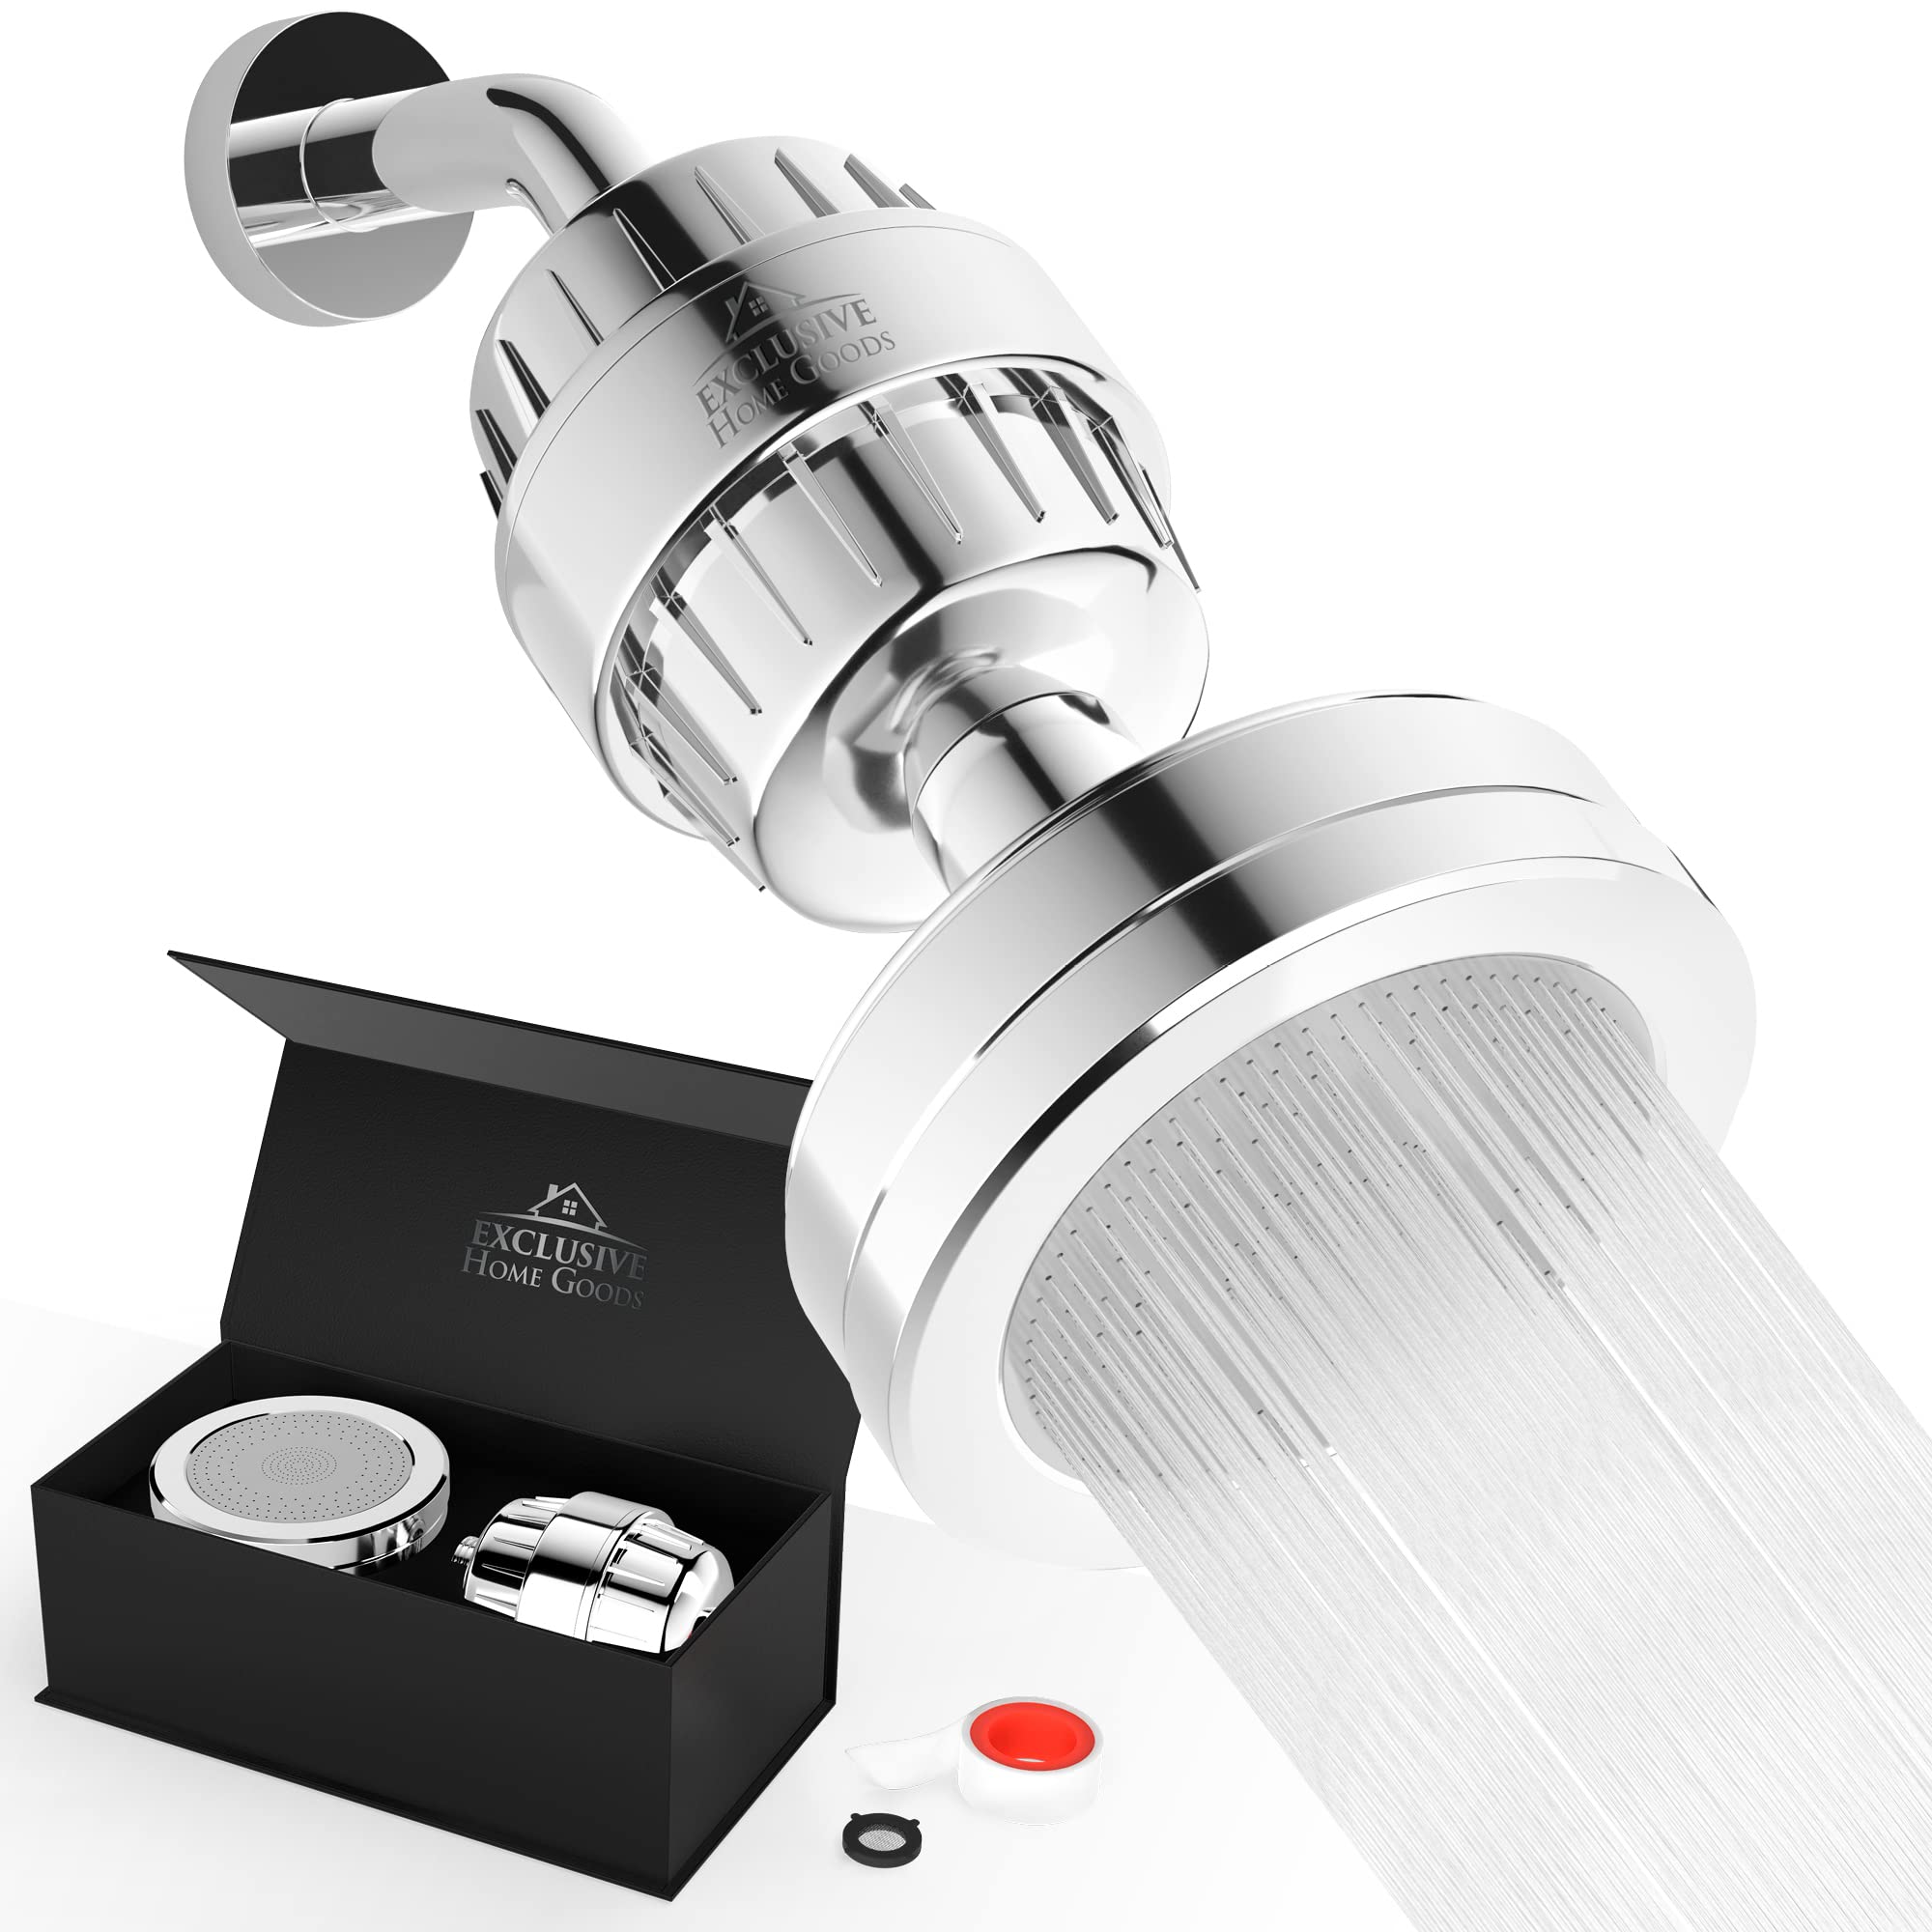 Luxury Filtered Shower Head Set - Filtered Shower Head Combo Removes Chlorine, Heavy Metals, Impurities & Soften Water - High Pressure Rainfall Shower Head with Vitamin C & E Cartridges  - Very Good